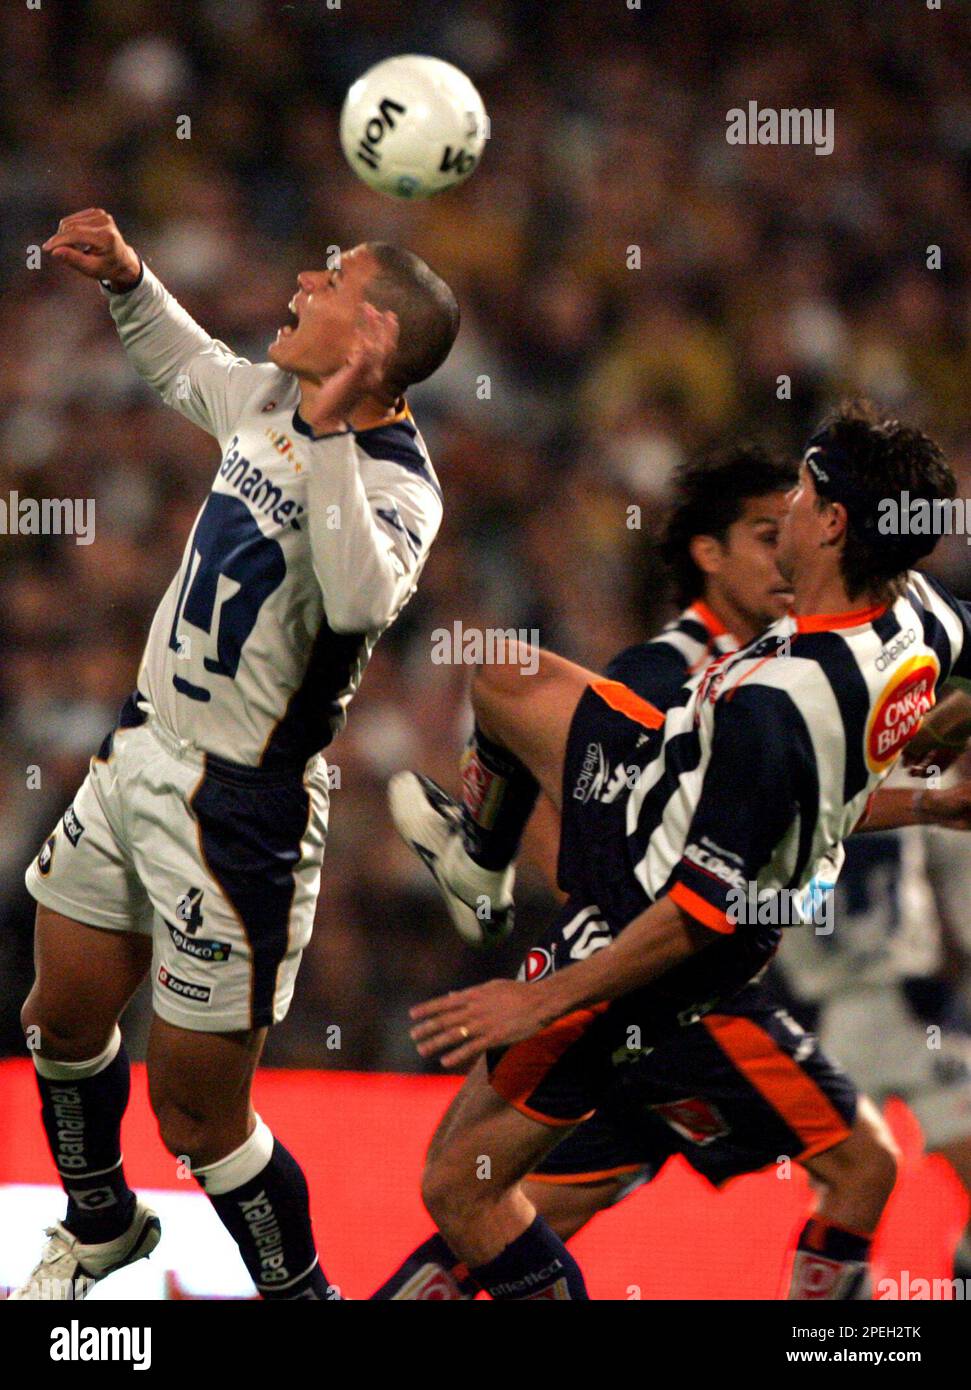 Dario Veron, left, of Pumas, fights to head the ball against Guillermo  Franco of Monterrey during the first game of the Mexican soccer championship  final at the University Stadium in Mexico City